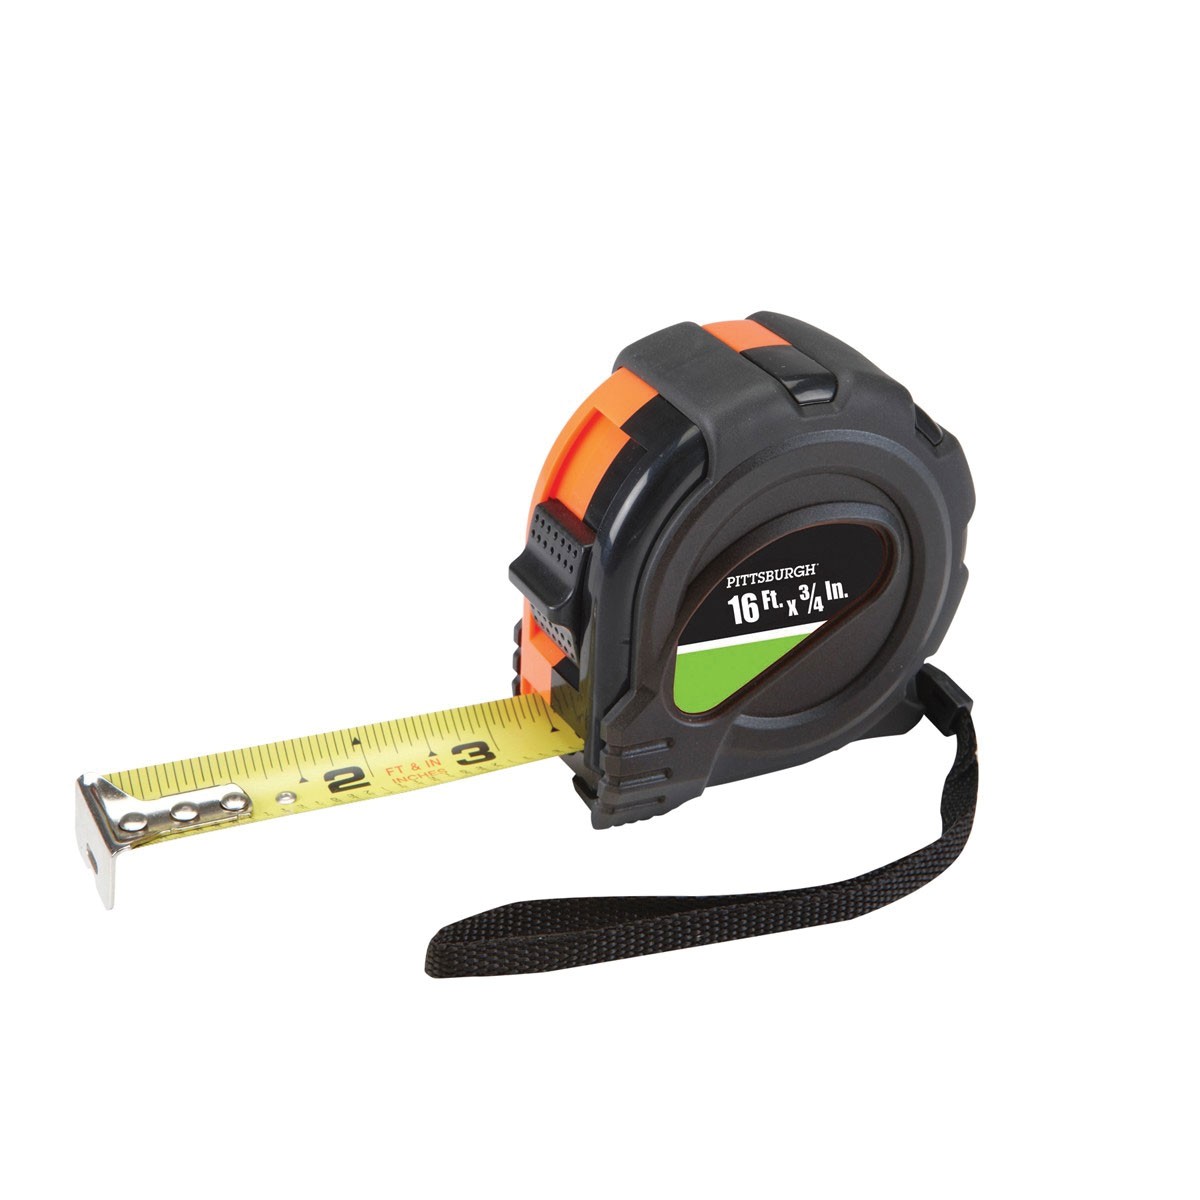 16 ft. x 3/4 in. QuikFind Tape Measure with ABS Casing